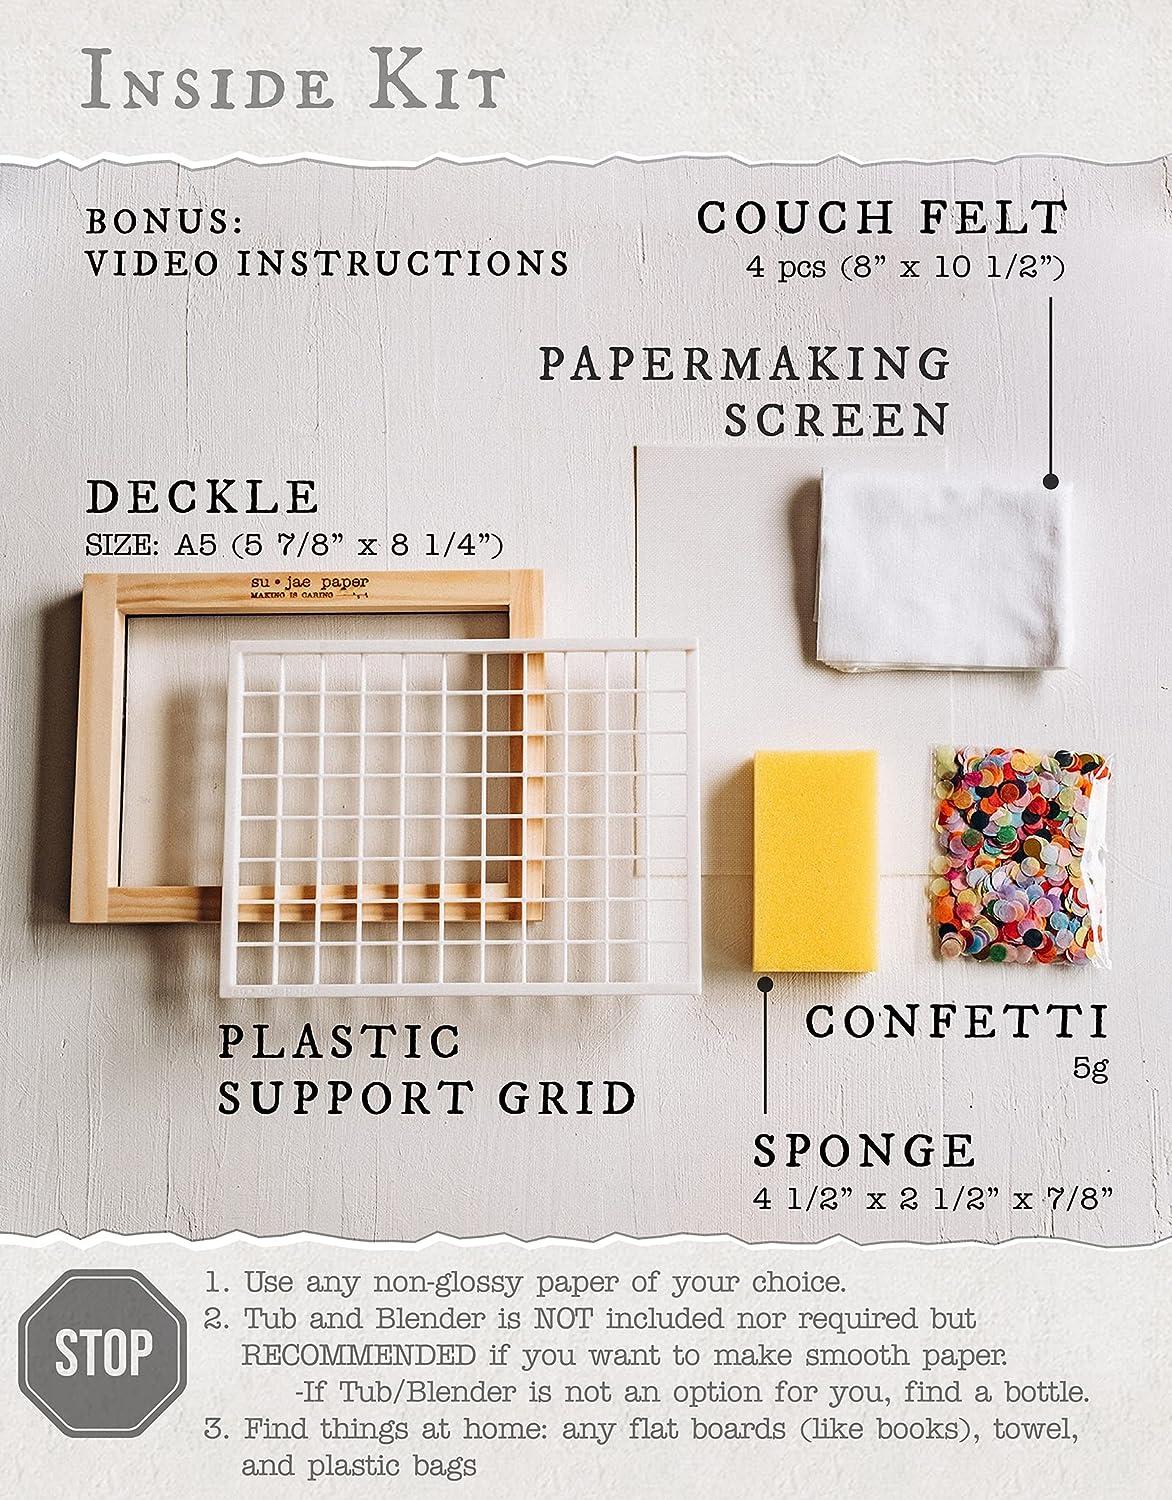 Su Jae Paper Waterproof Paper Making Screen Kit to Craft Your Own Handmade A5 Paper: Wood Deckle, Mesh Screen, Plastic Grid, Confetti, Sponge, 4 Couch